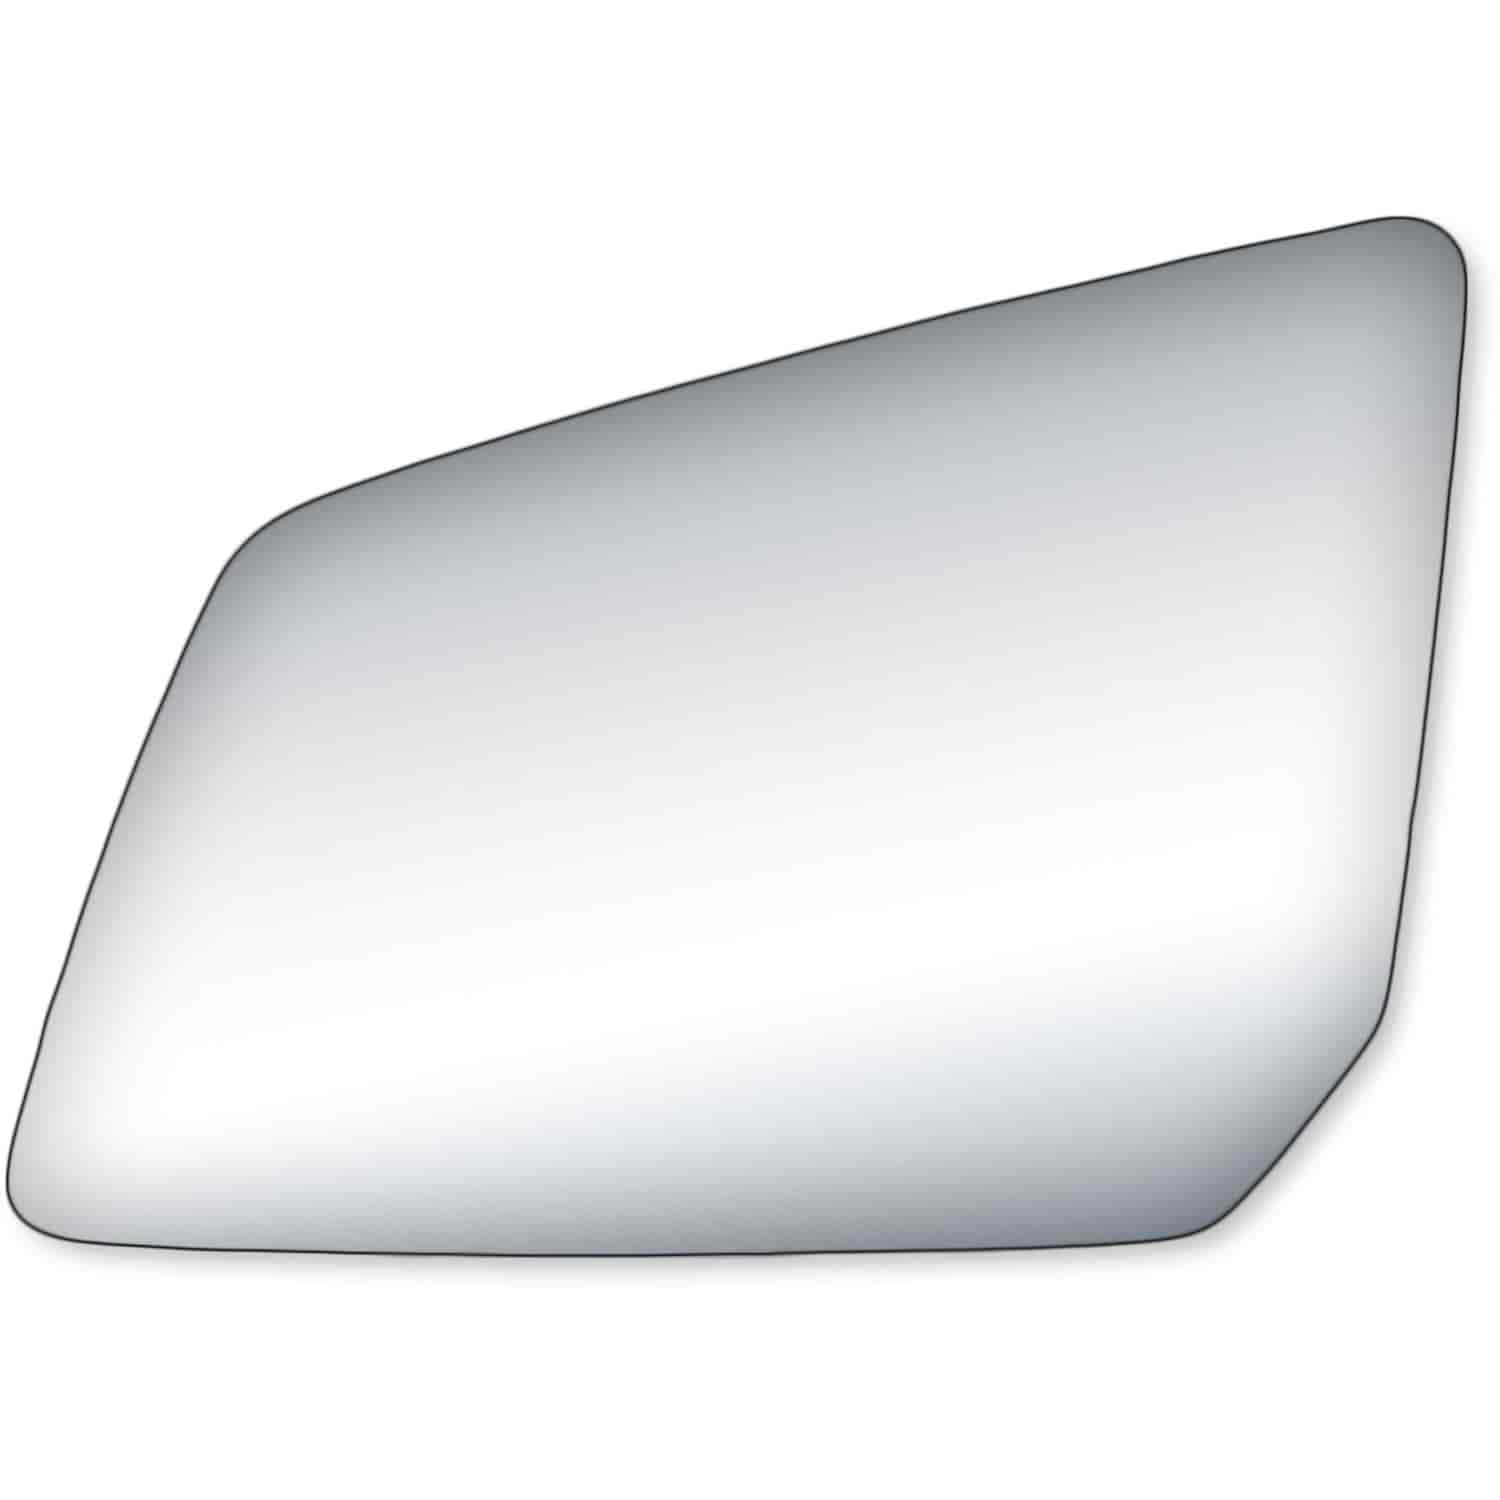 Replacement Glass for 09-14 Traverse w/out blind spot